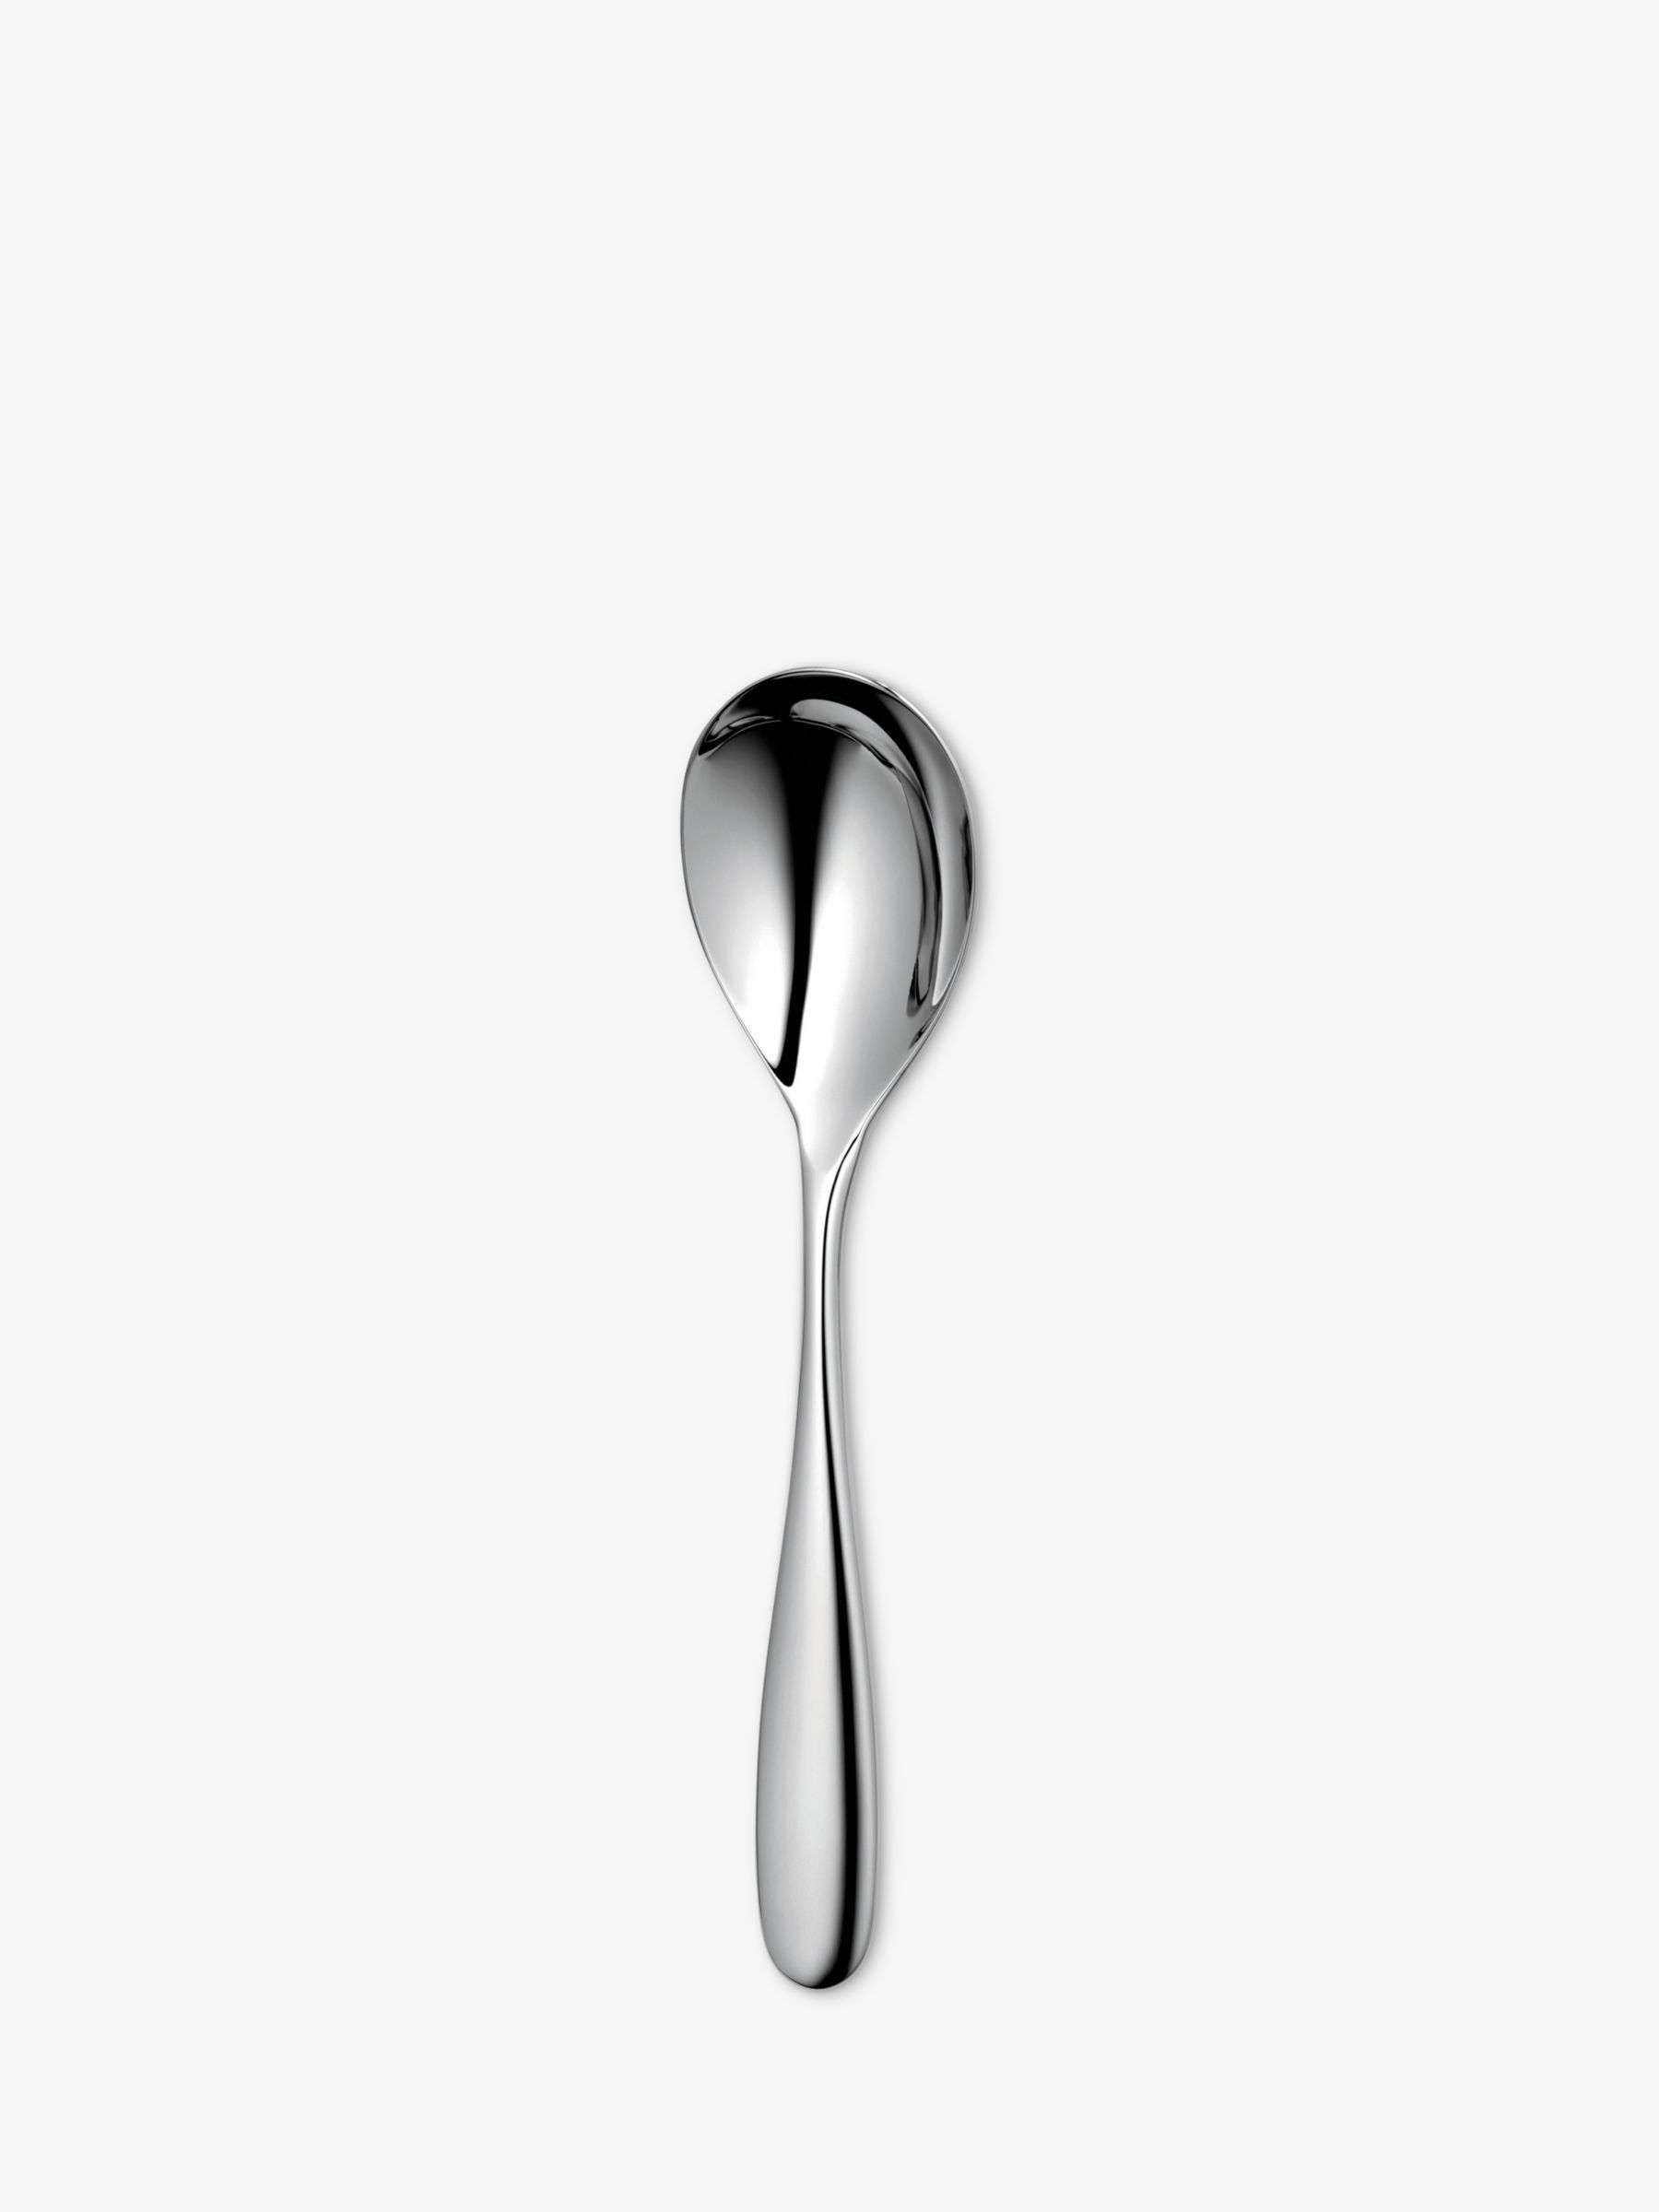 Stanton Soup Spoon, Stainless Steel